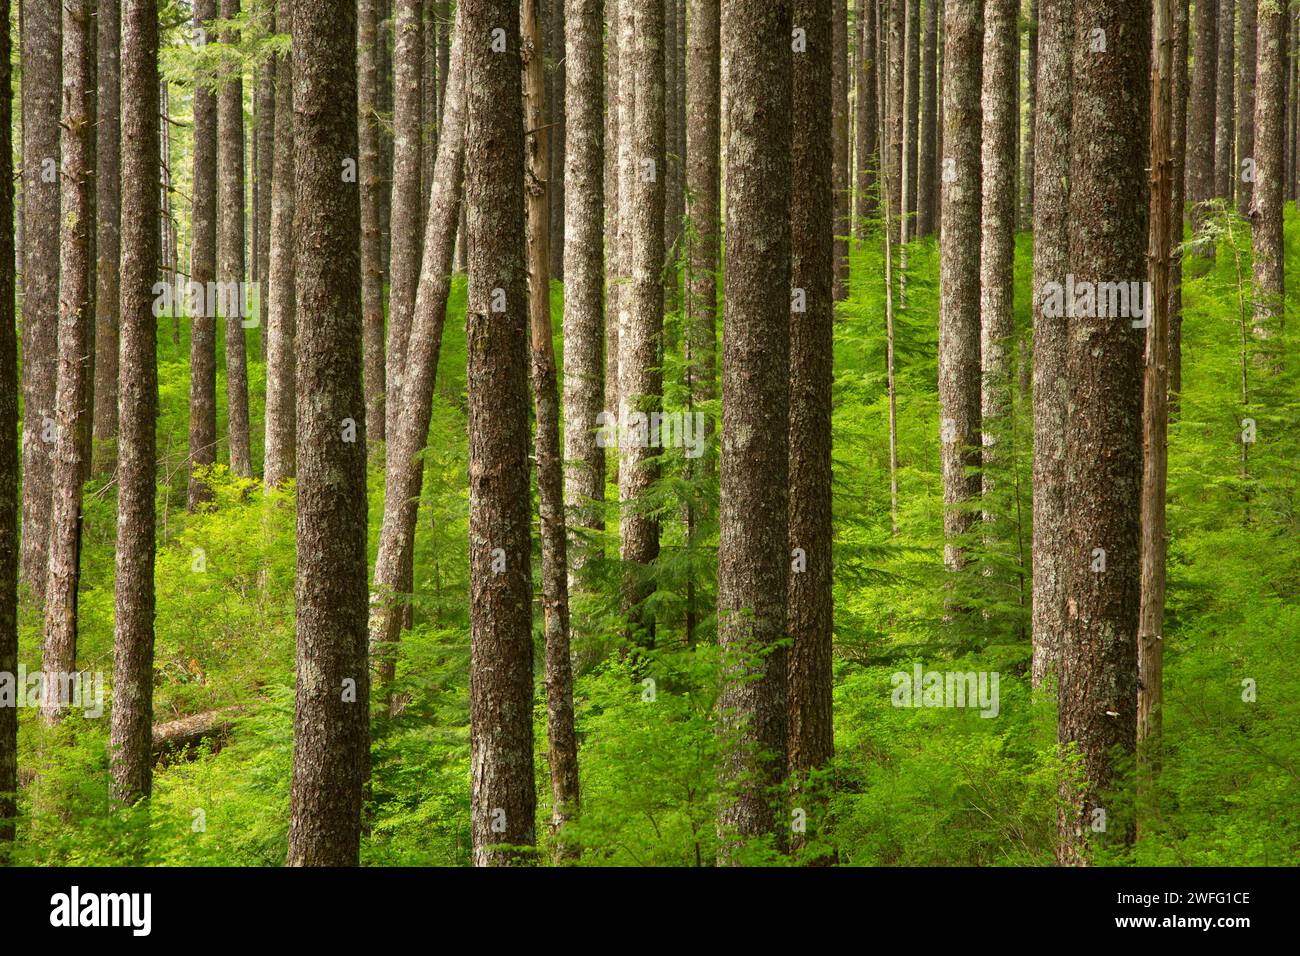 Douglas fir forest along Pioneer Indian Trail, Siuslaw National Forest, Oregon Stock Photo